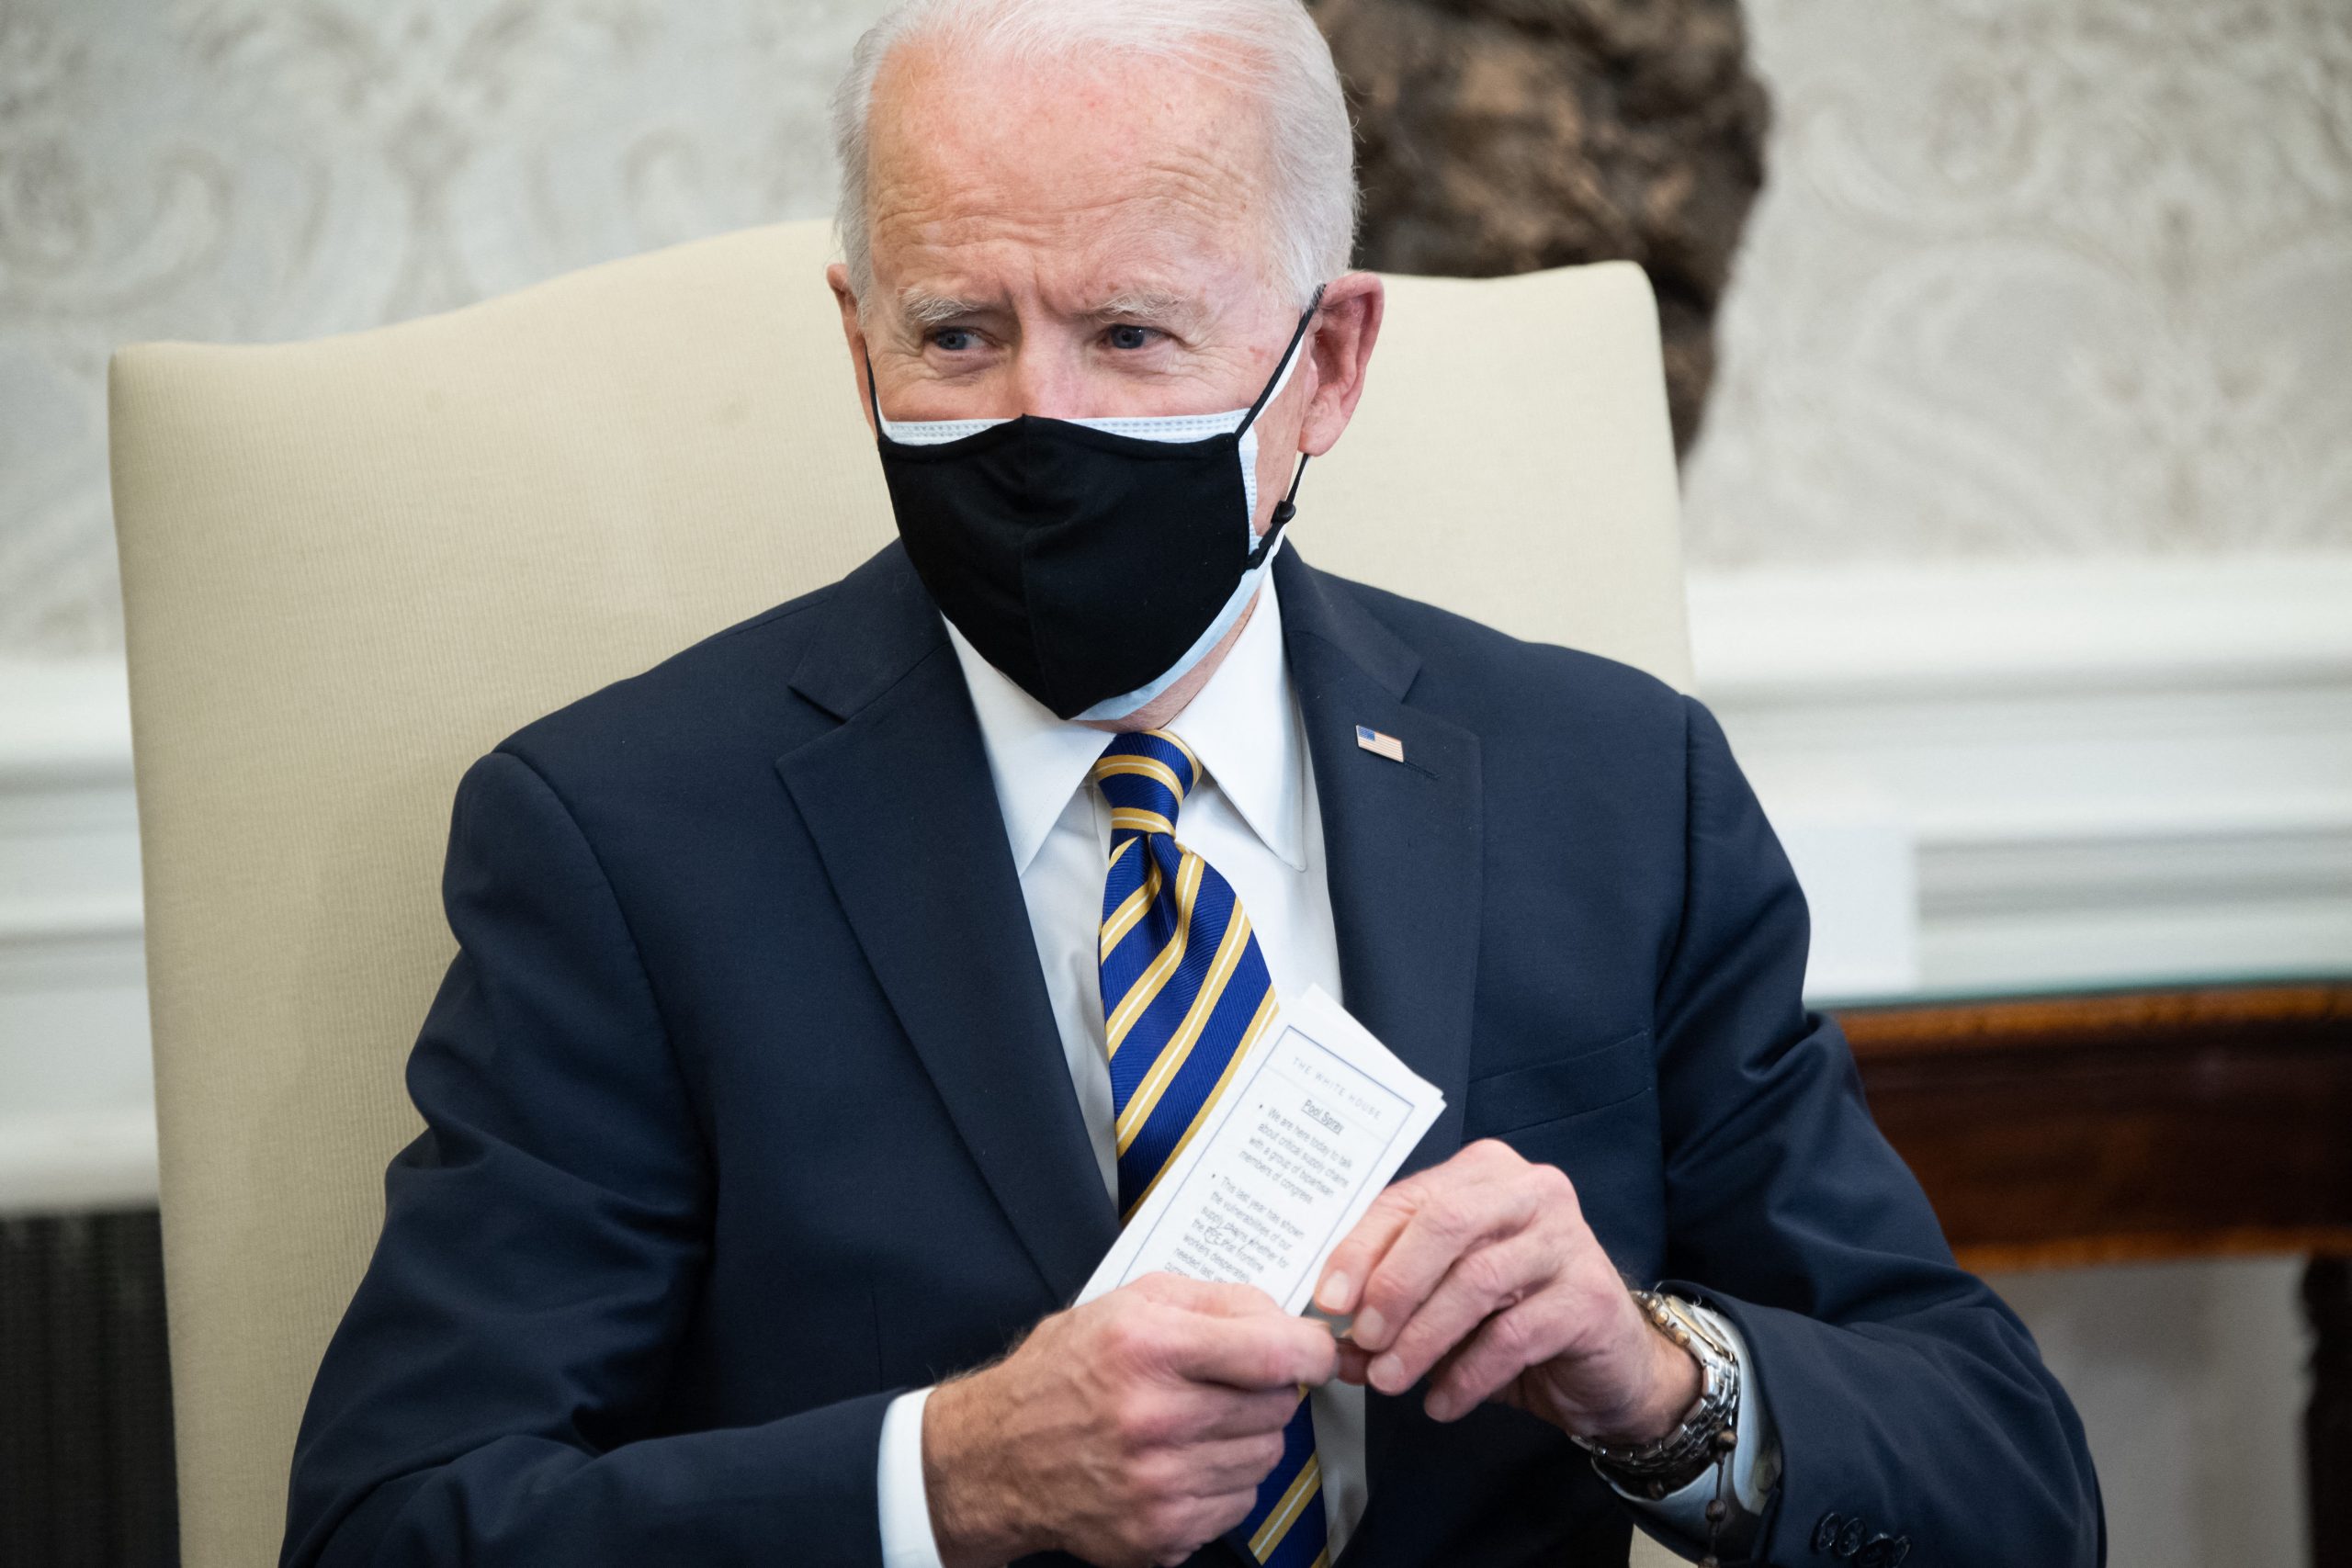 Joe Biden urges people to get vaccinated as all US adults now eligible to get COVID jabs